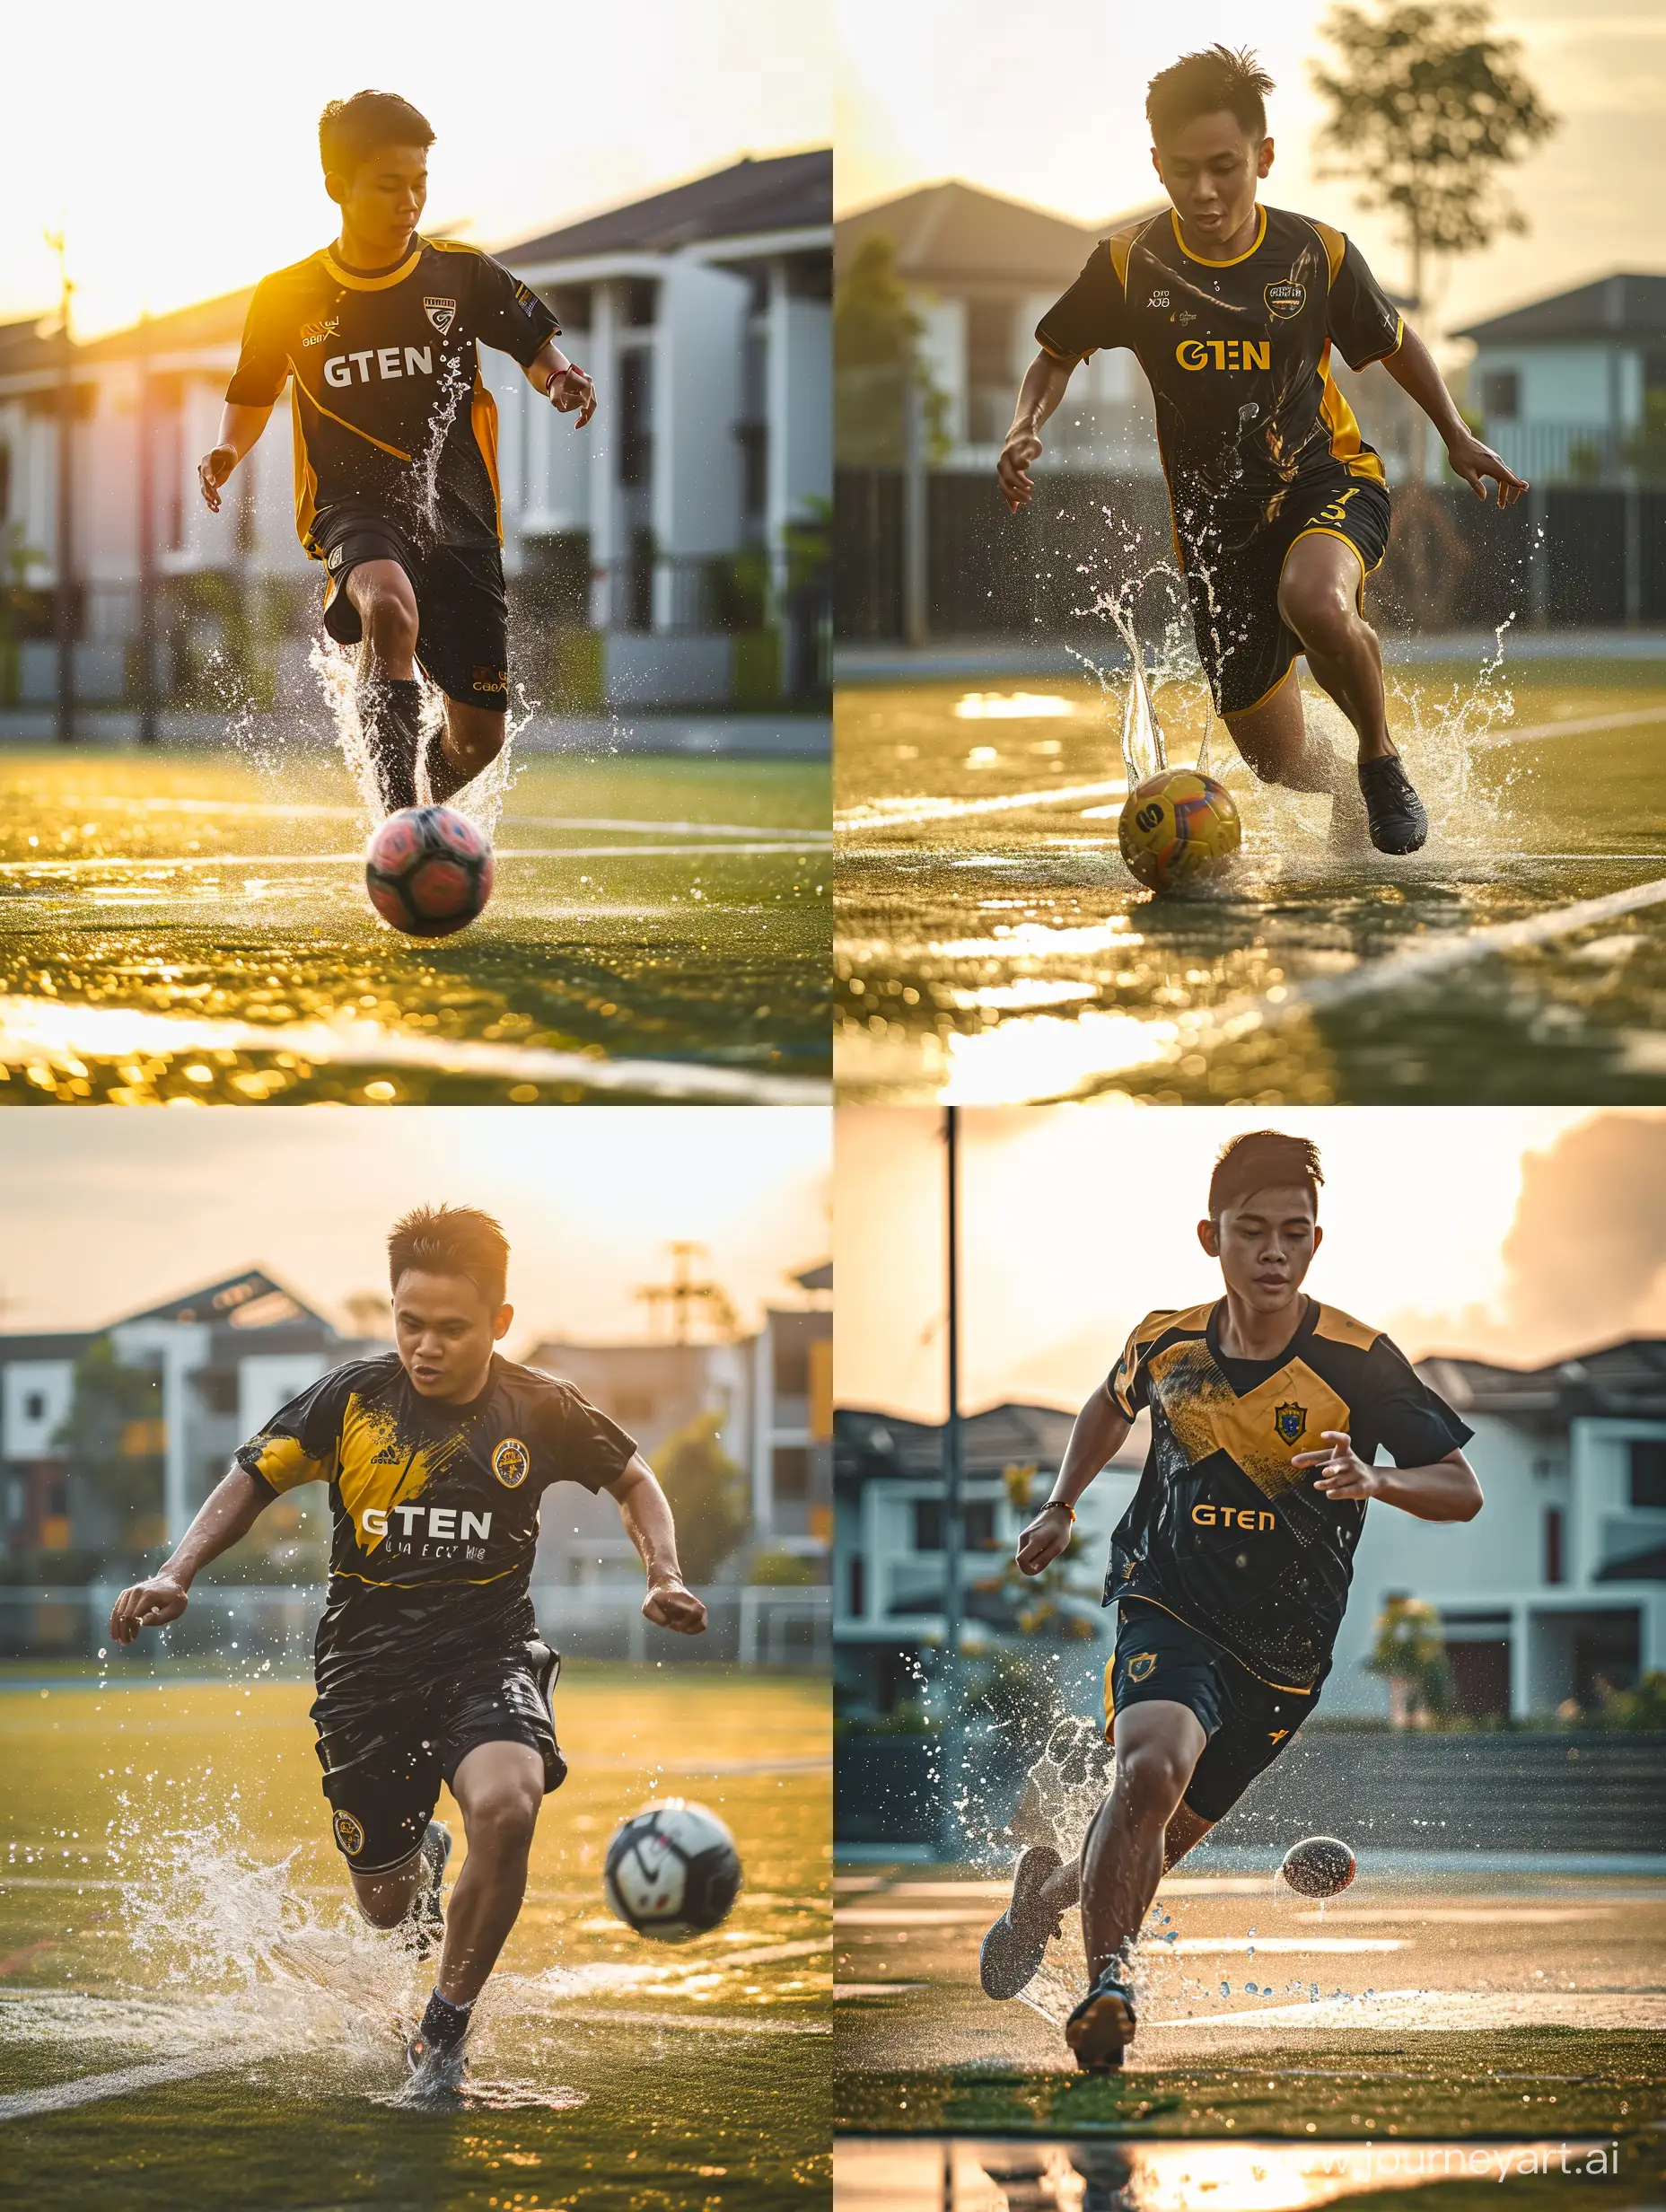 
ultra realistic a malay man runs while kicking a ball on a synthatic field. there is a splash of water. wearing a black and yellow shirt. the shirt has G-TEN FC written on it. sunlight in the evening. the background of a modern housing estate. canon eos-id x mark iii dslr --v 6.0